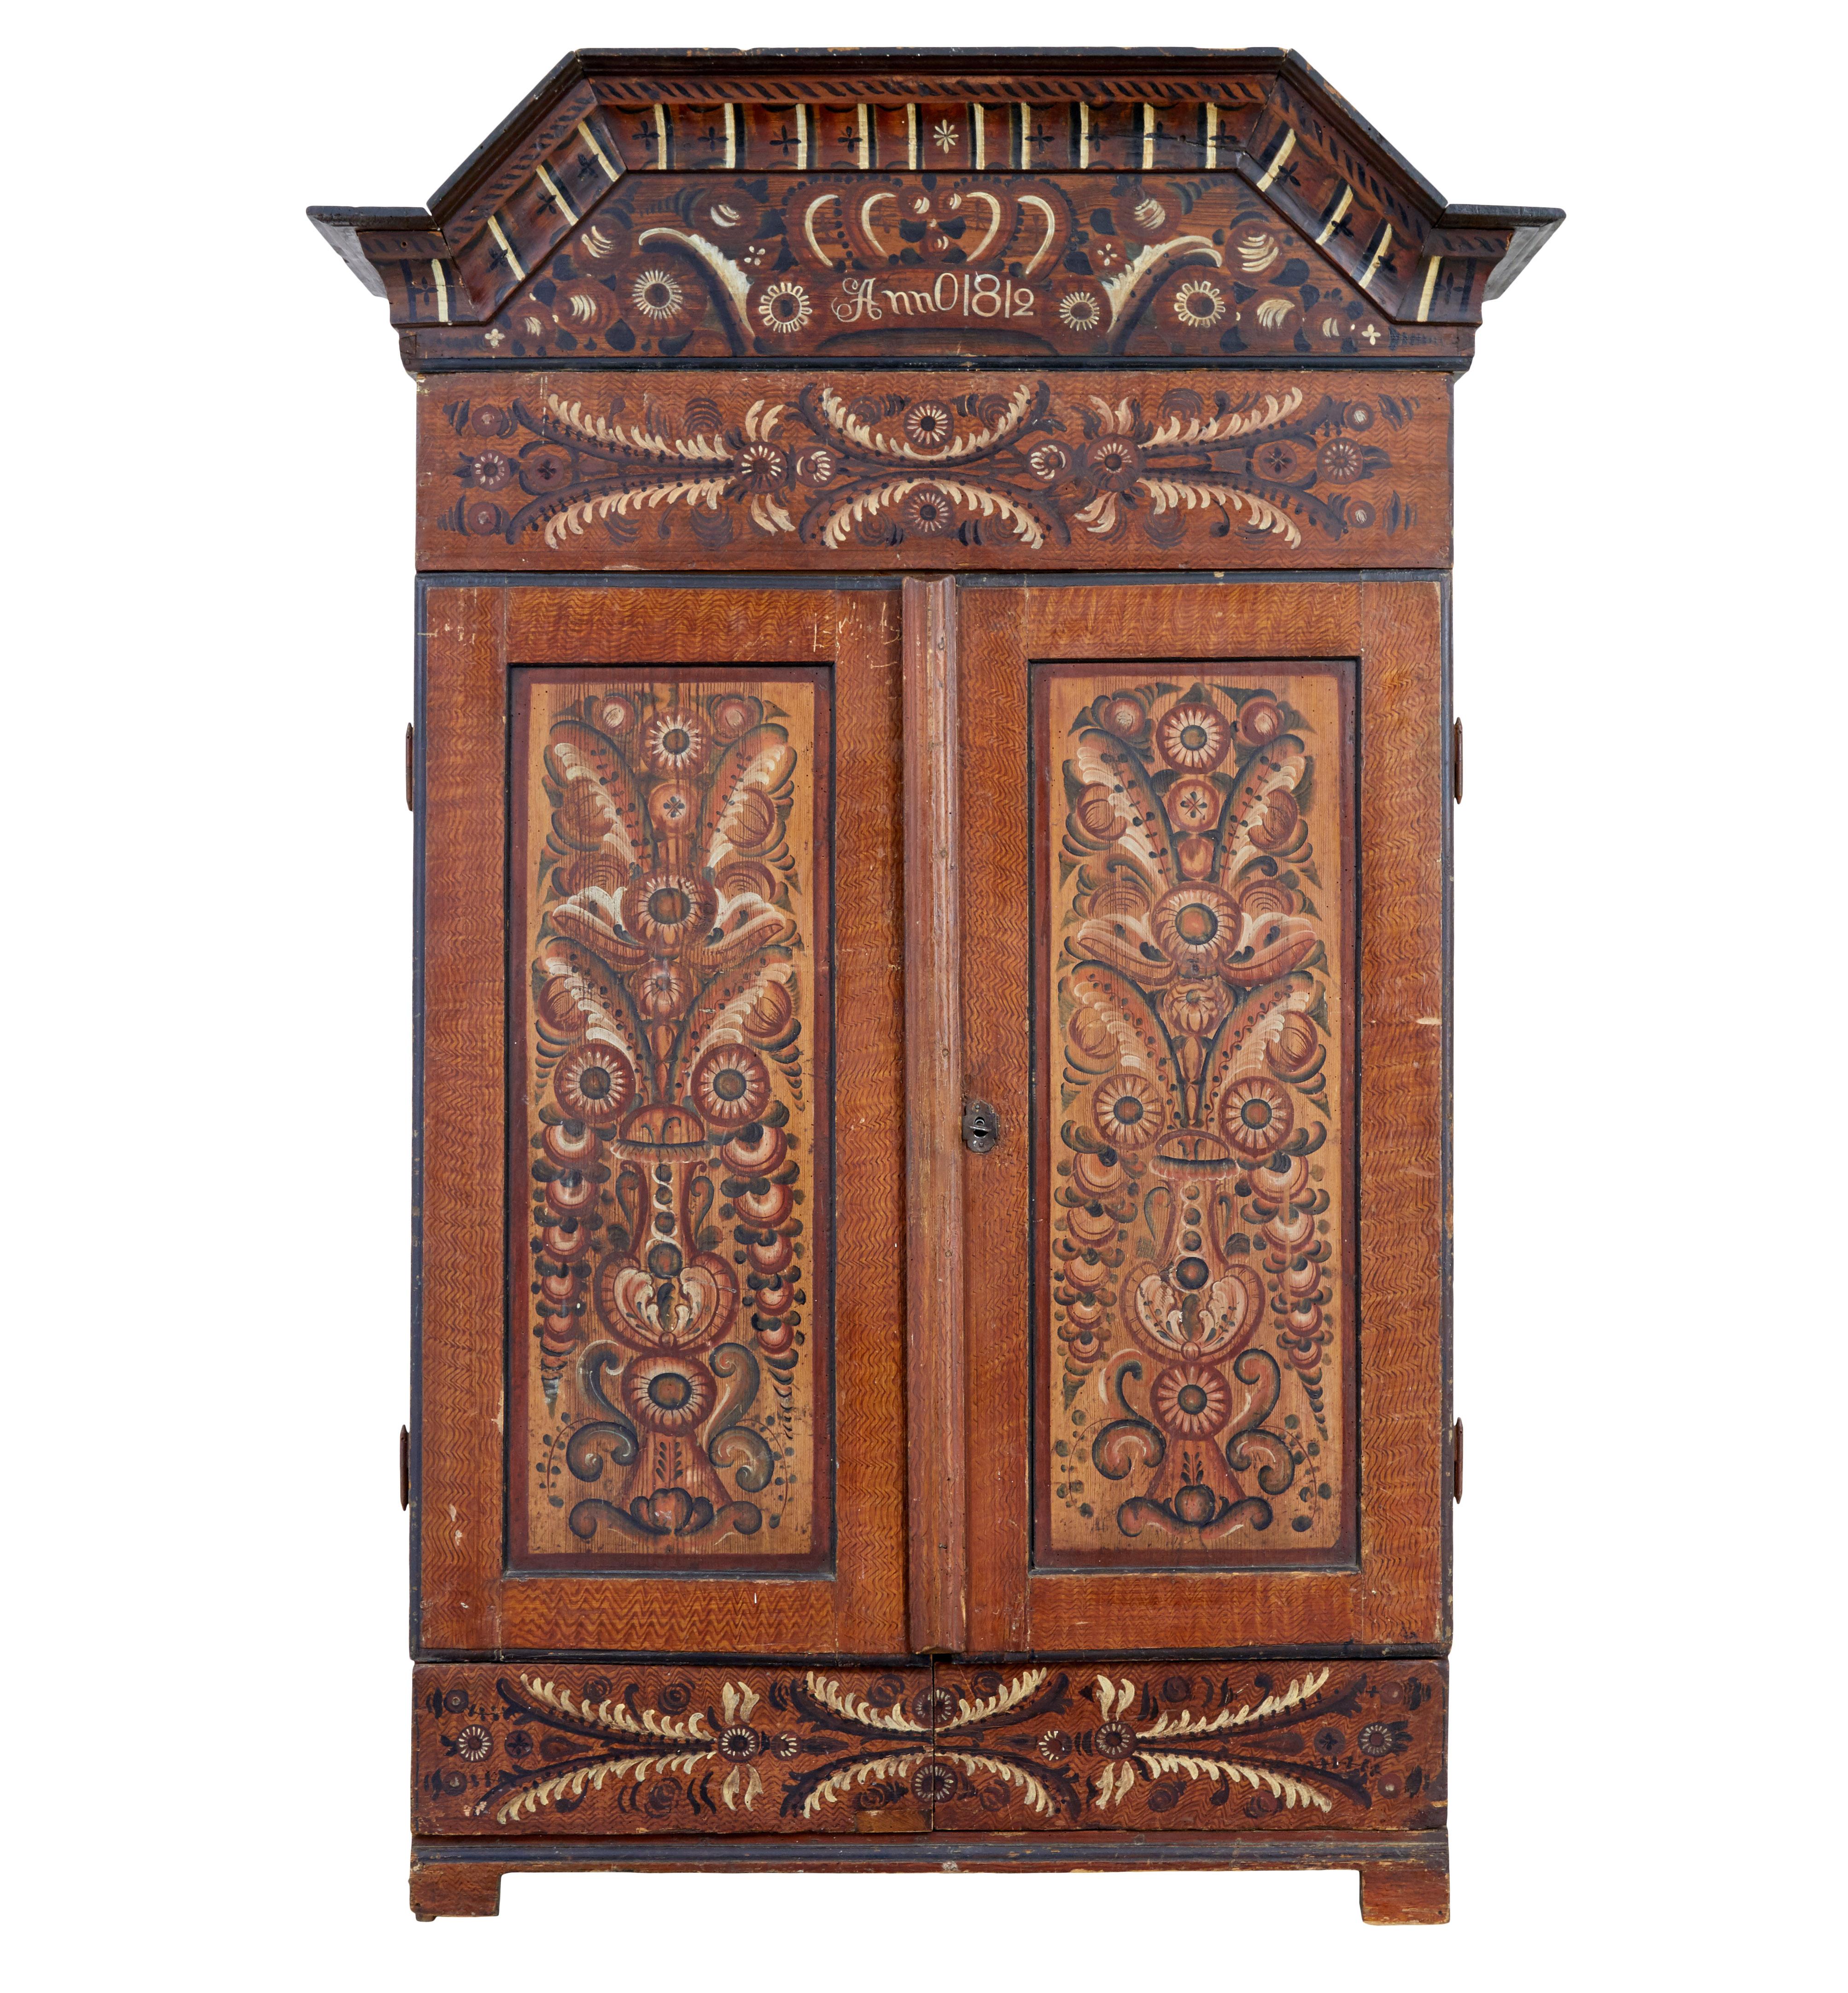 Early 19th century hand painted Swedish cupboard circa 1812.

Fine quality example of Swedish hand painted folk art in the form of a cupboard.

Painted in a tonal brown wash with ragwork elements and hand painted florals and designs to all